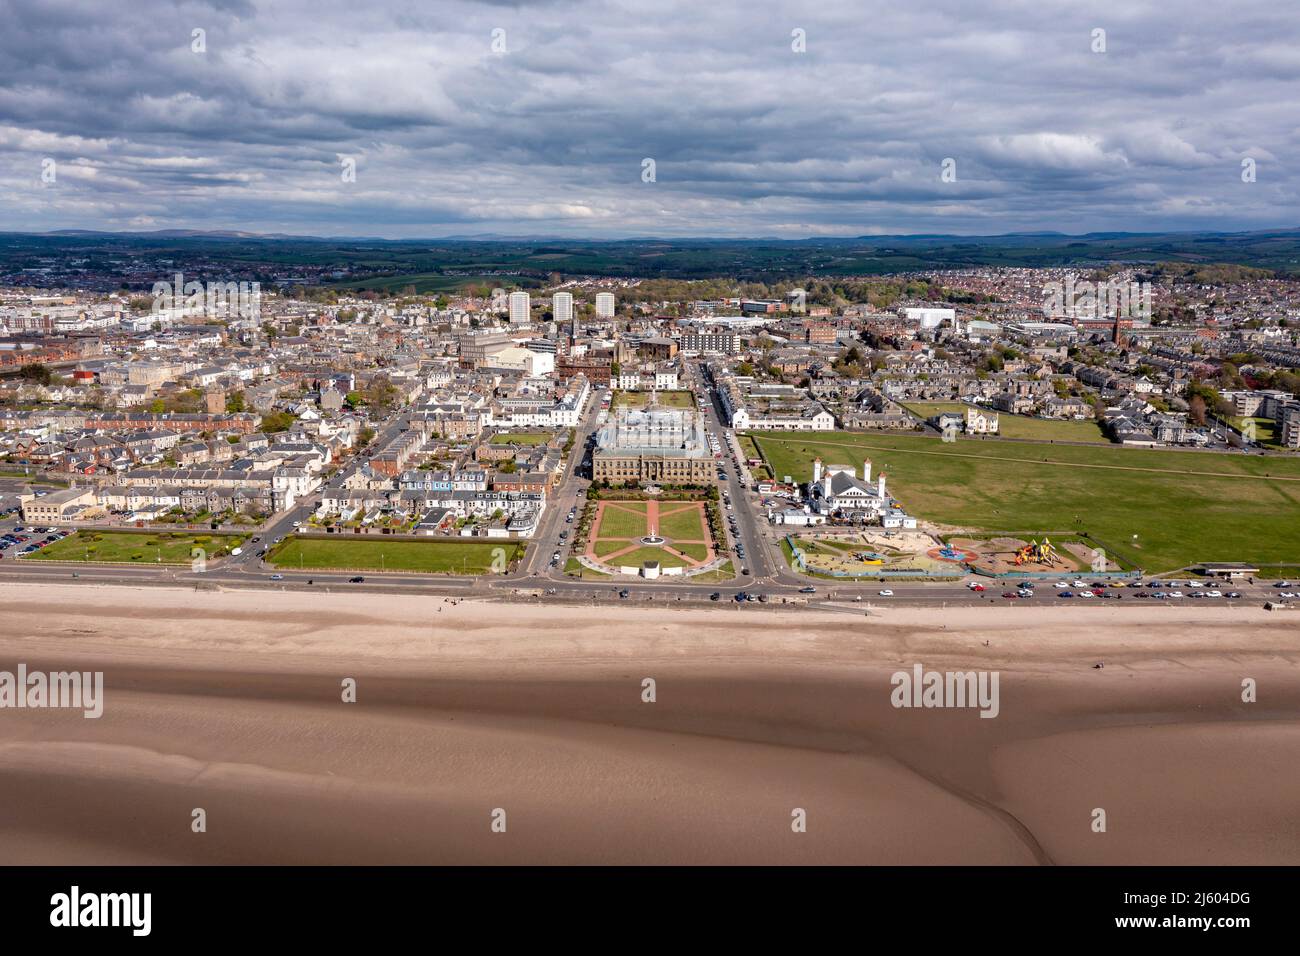 Ayr, Scotland, UK. 26th Apr, 2022. PICTURED: Aerial drone view looking down from above of Ayr Beach taking in views of the Firth of Clyde and the seaside town of Ayr. West of Scotland saw bright sunshine and blue sky at the seaside on Ayr Beach. People out walking and a horse rider takes their horse through a gallop in the cool sea water. Credit: Colin Fisher/Alamy Live News Stock Photo